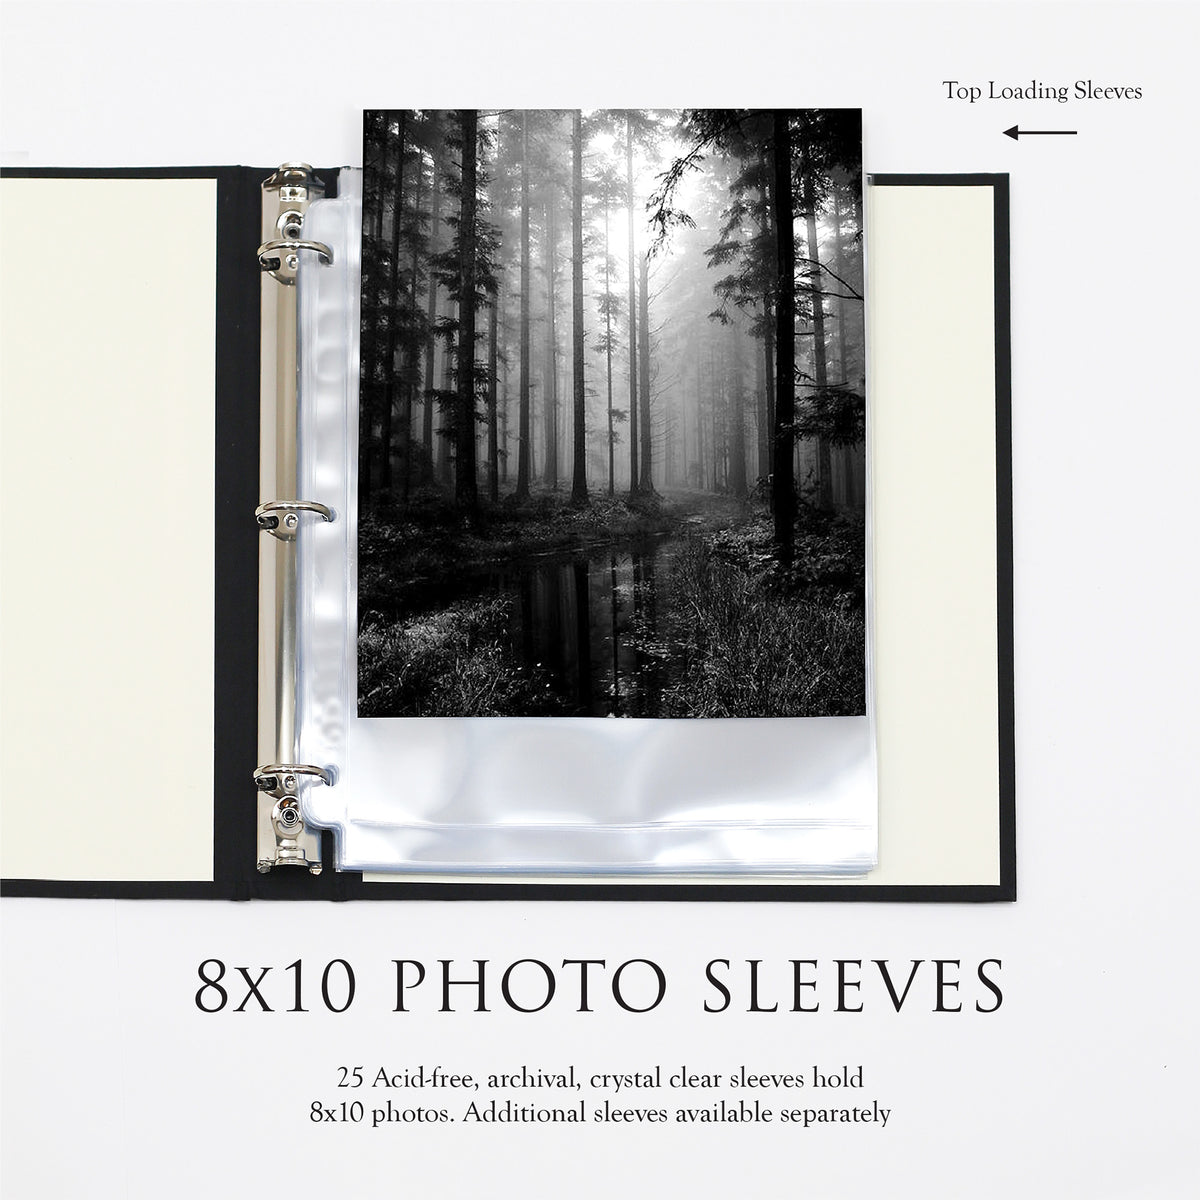 Large Photo Binder For 8x10 Photos | Cover: Slate Vegan Leather | Available Personalized